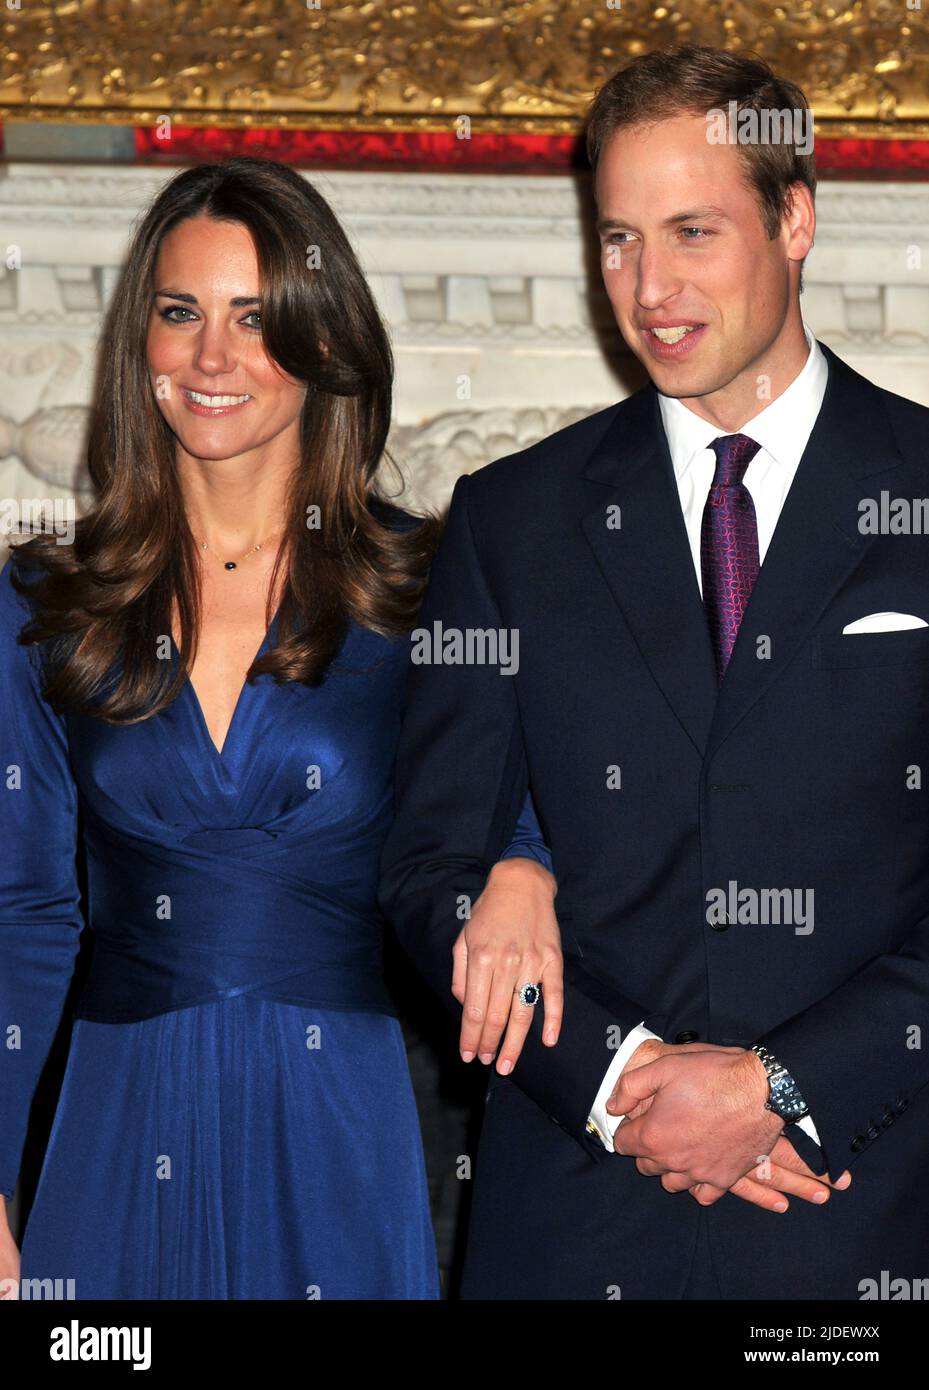 File photo dated 16/11/2010 of Prince William and Kate Middleton, during a photocall in the State Apartments of St James's Palace, London to mark their engagement. The Duke of Cambridge celebrates his 40th birthday on Tuesday. Issue date: Monday June 20, 2022. Stock Photo